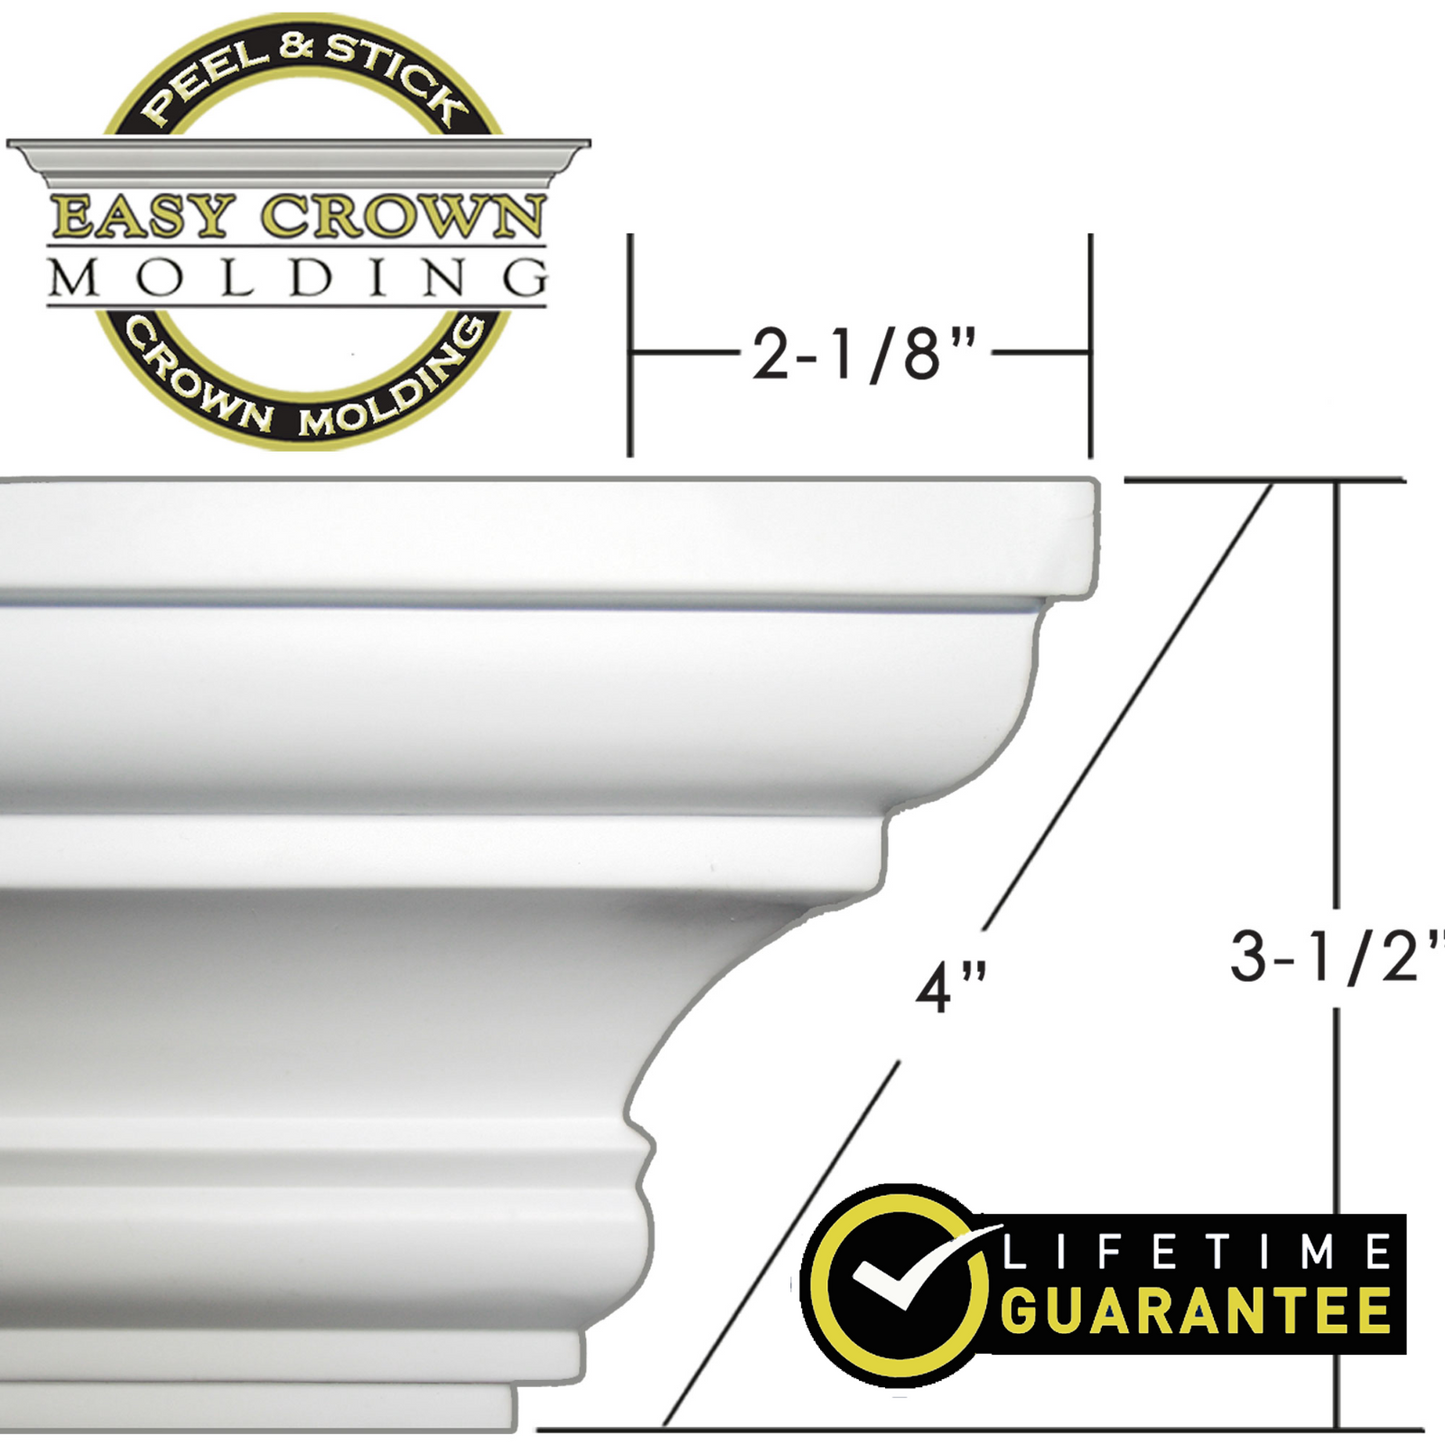 Easy Crown Molding 25th anniversary promo